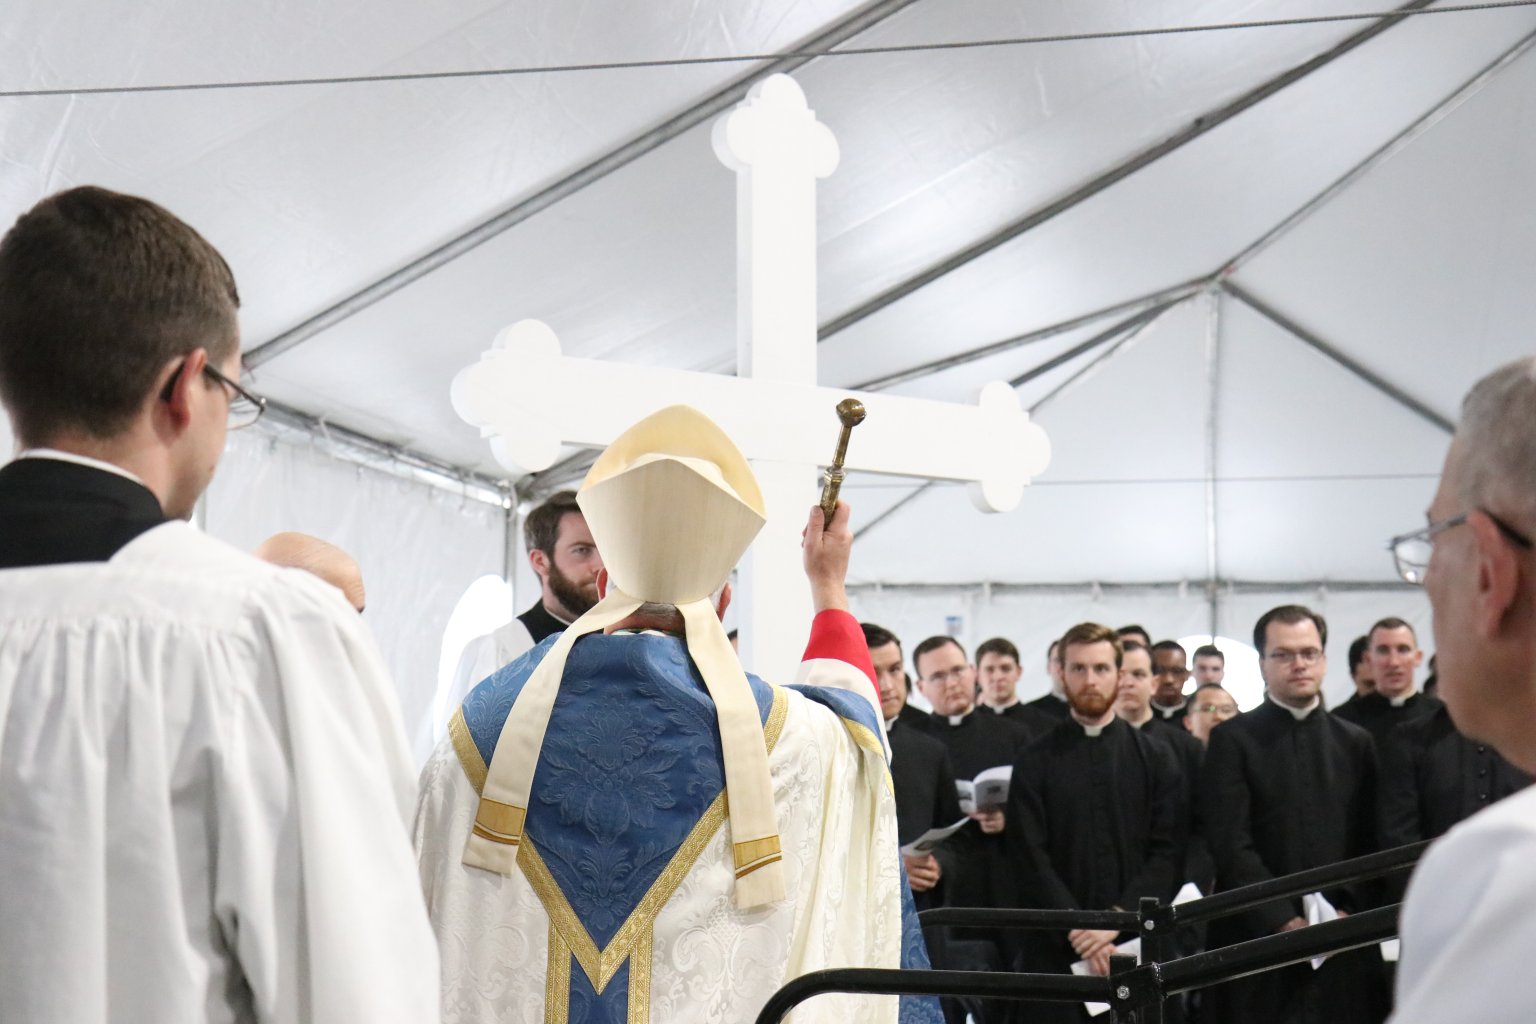 December 8, 2022 - Archbishop Nelson Pérez blessed the Cross made by seminarians Robert Bollinger (II Theology) and Gregory Miller (III Theology).